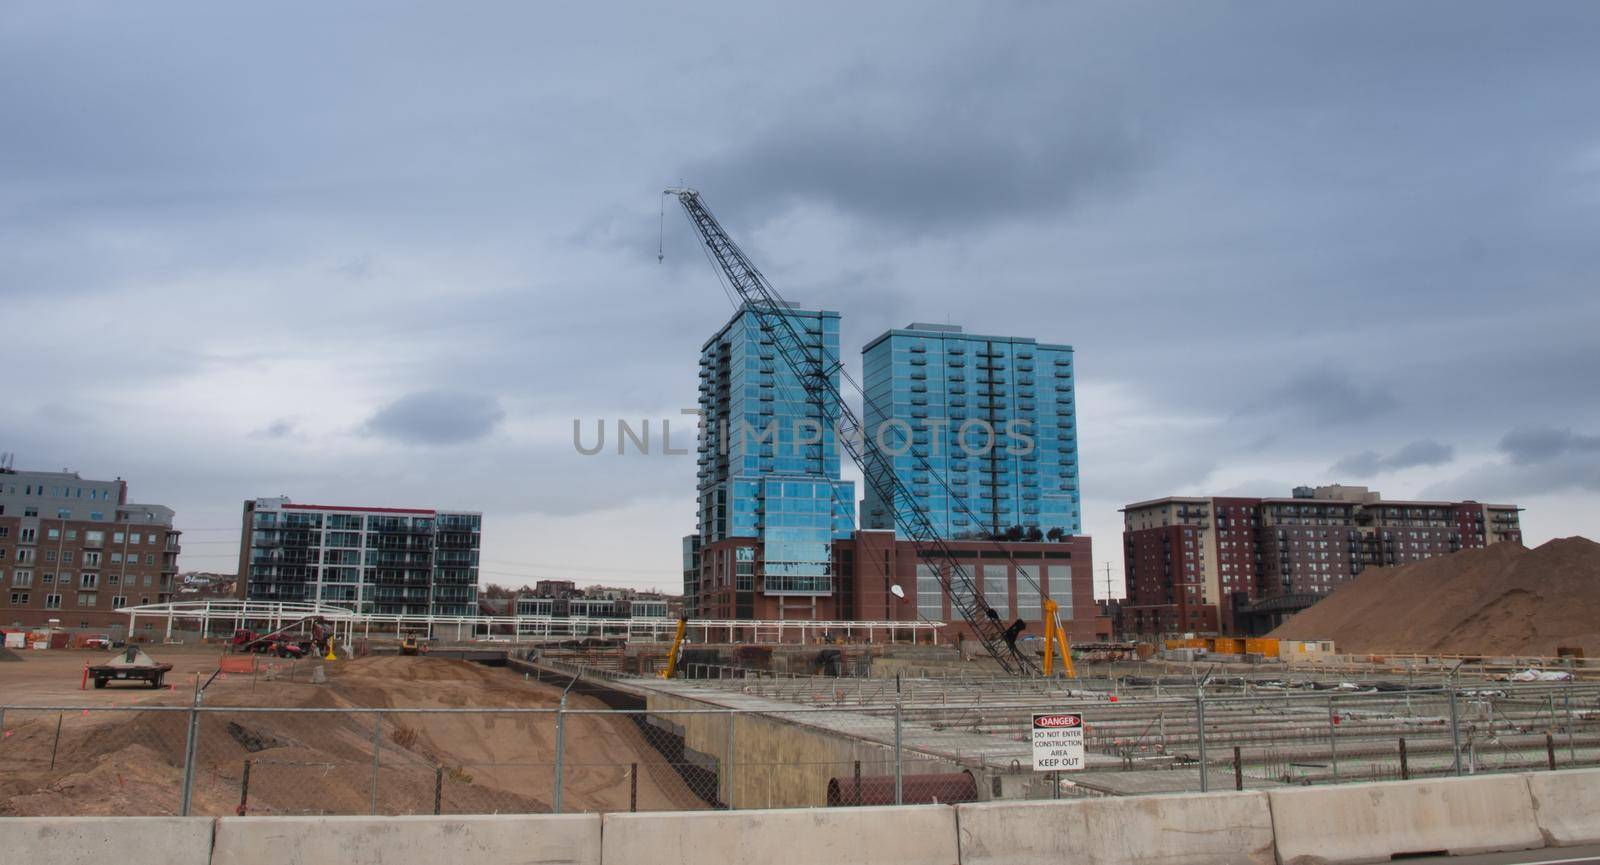 Construction site of the Union Station in Denver, Colorado.